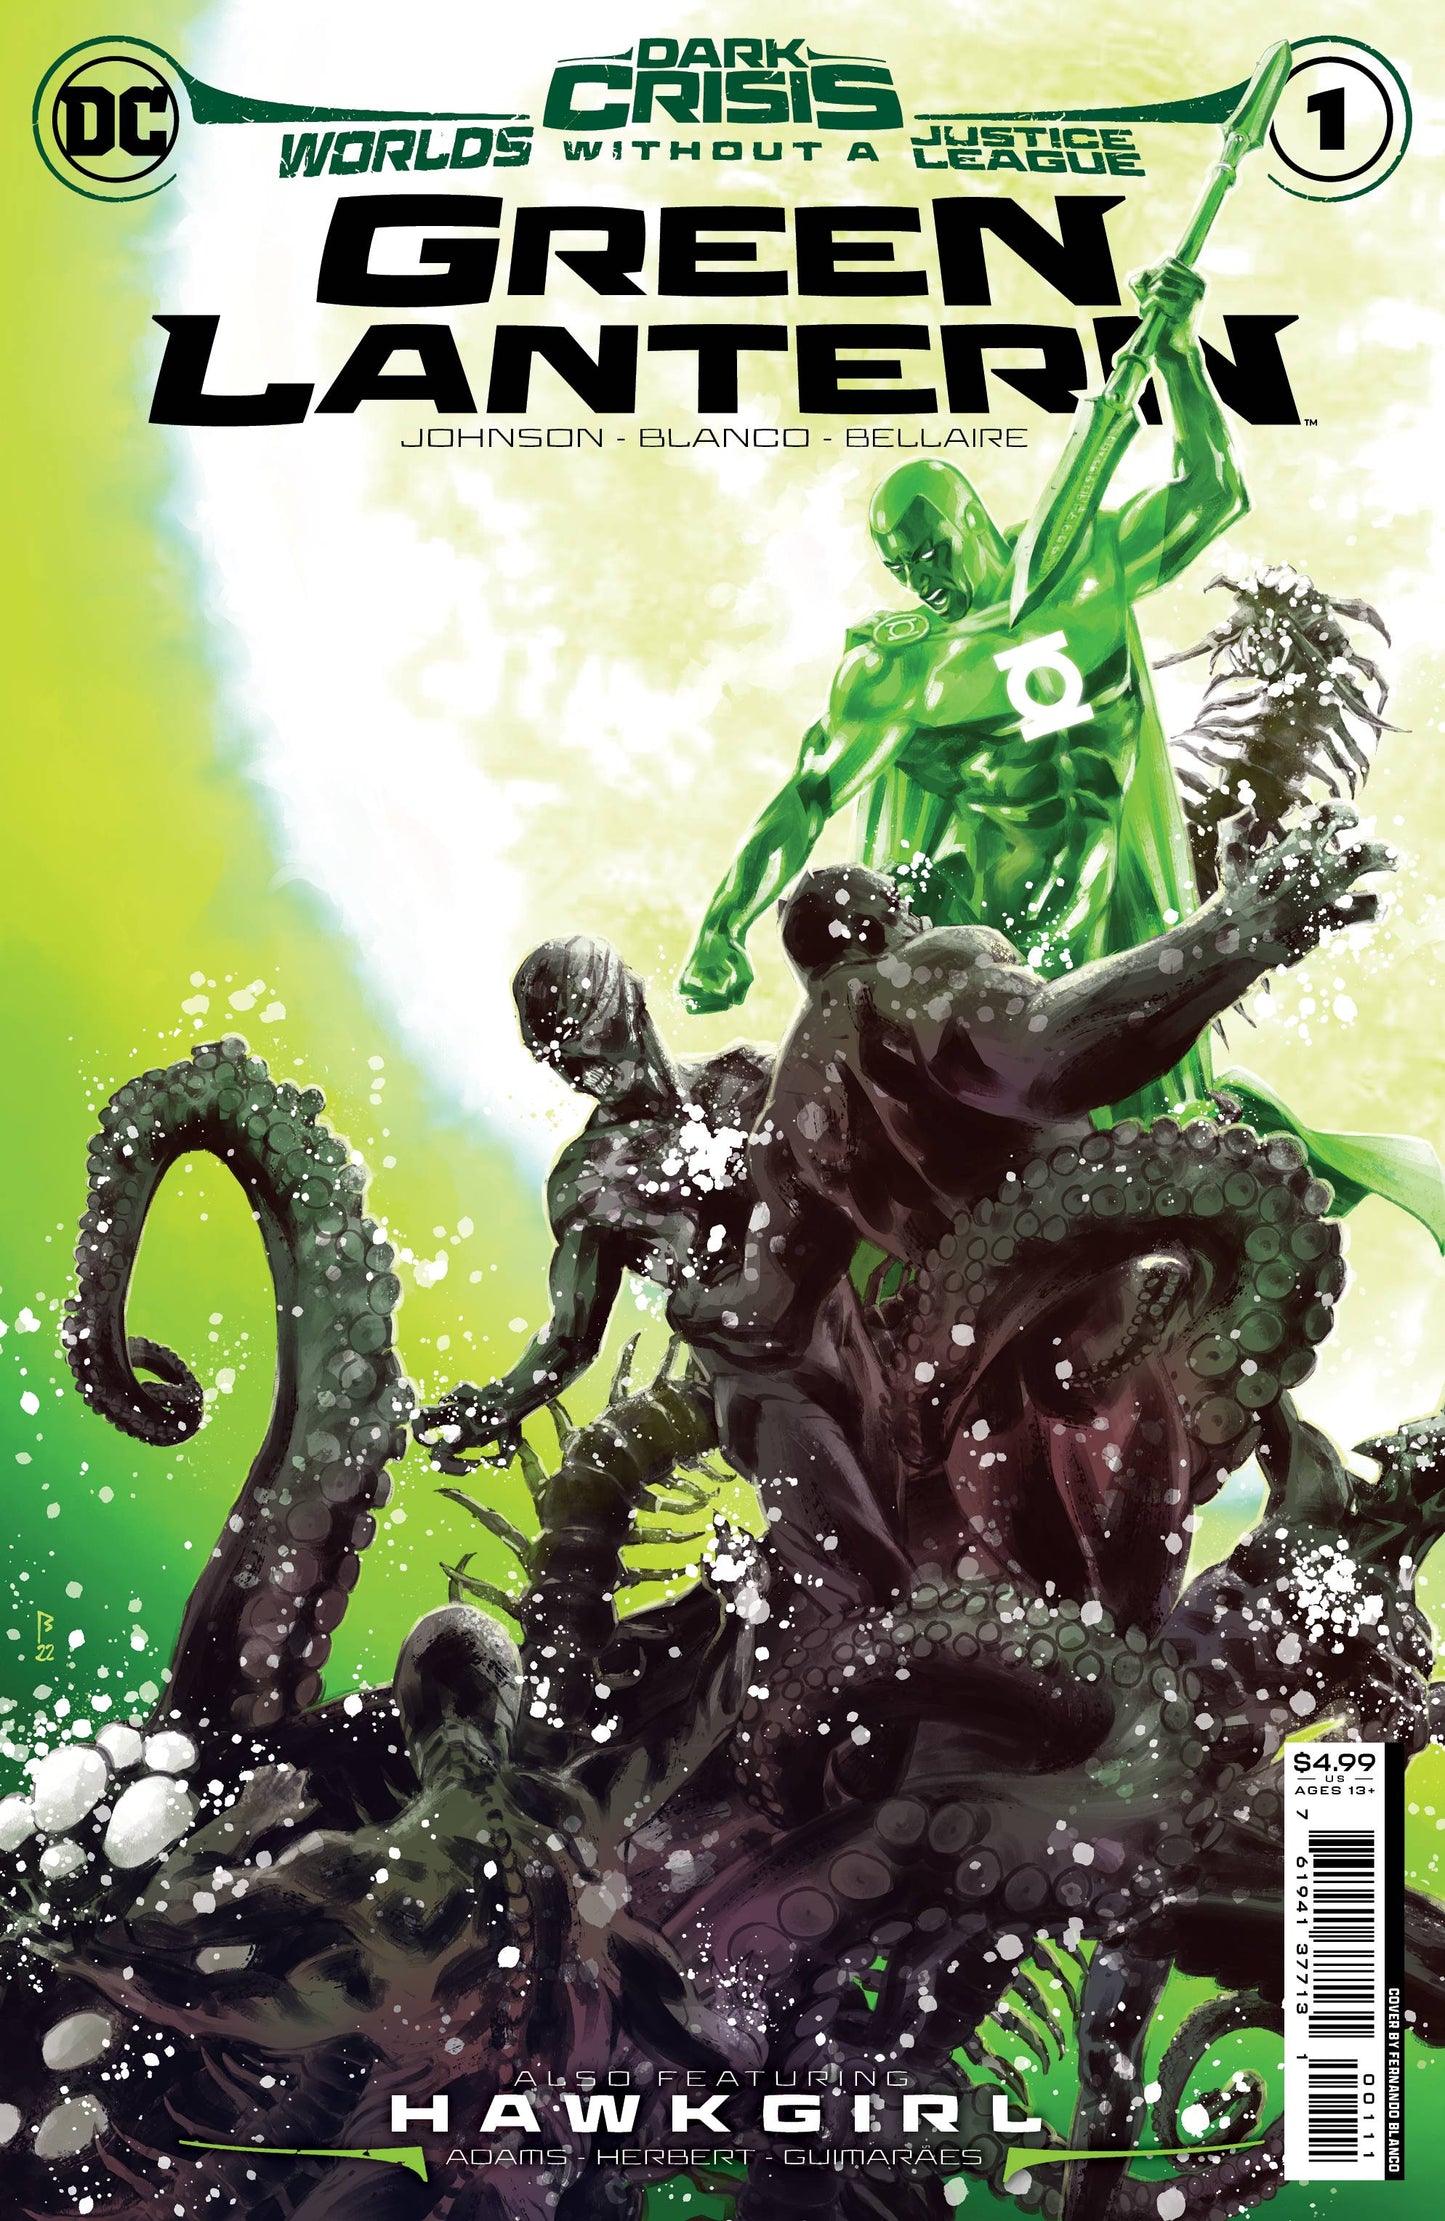 Dark Crisis: Worlds Without a Justice League	- Green Lantern #1